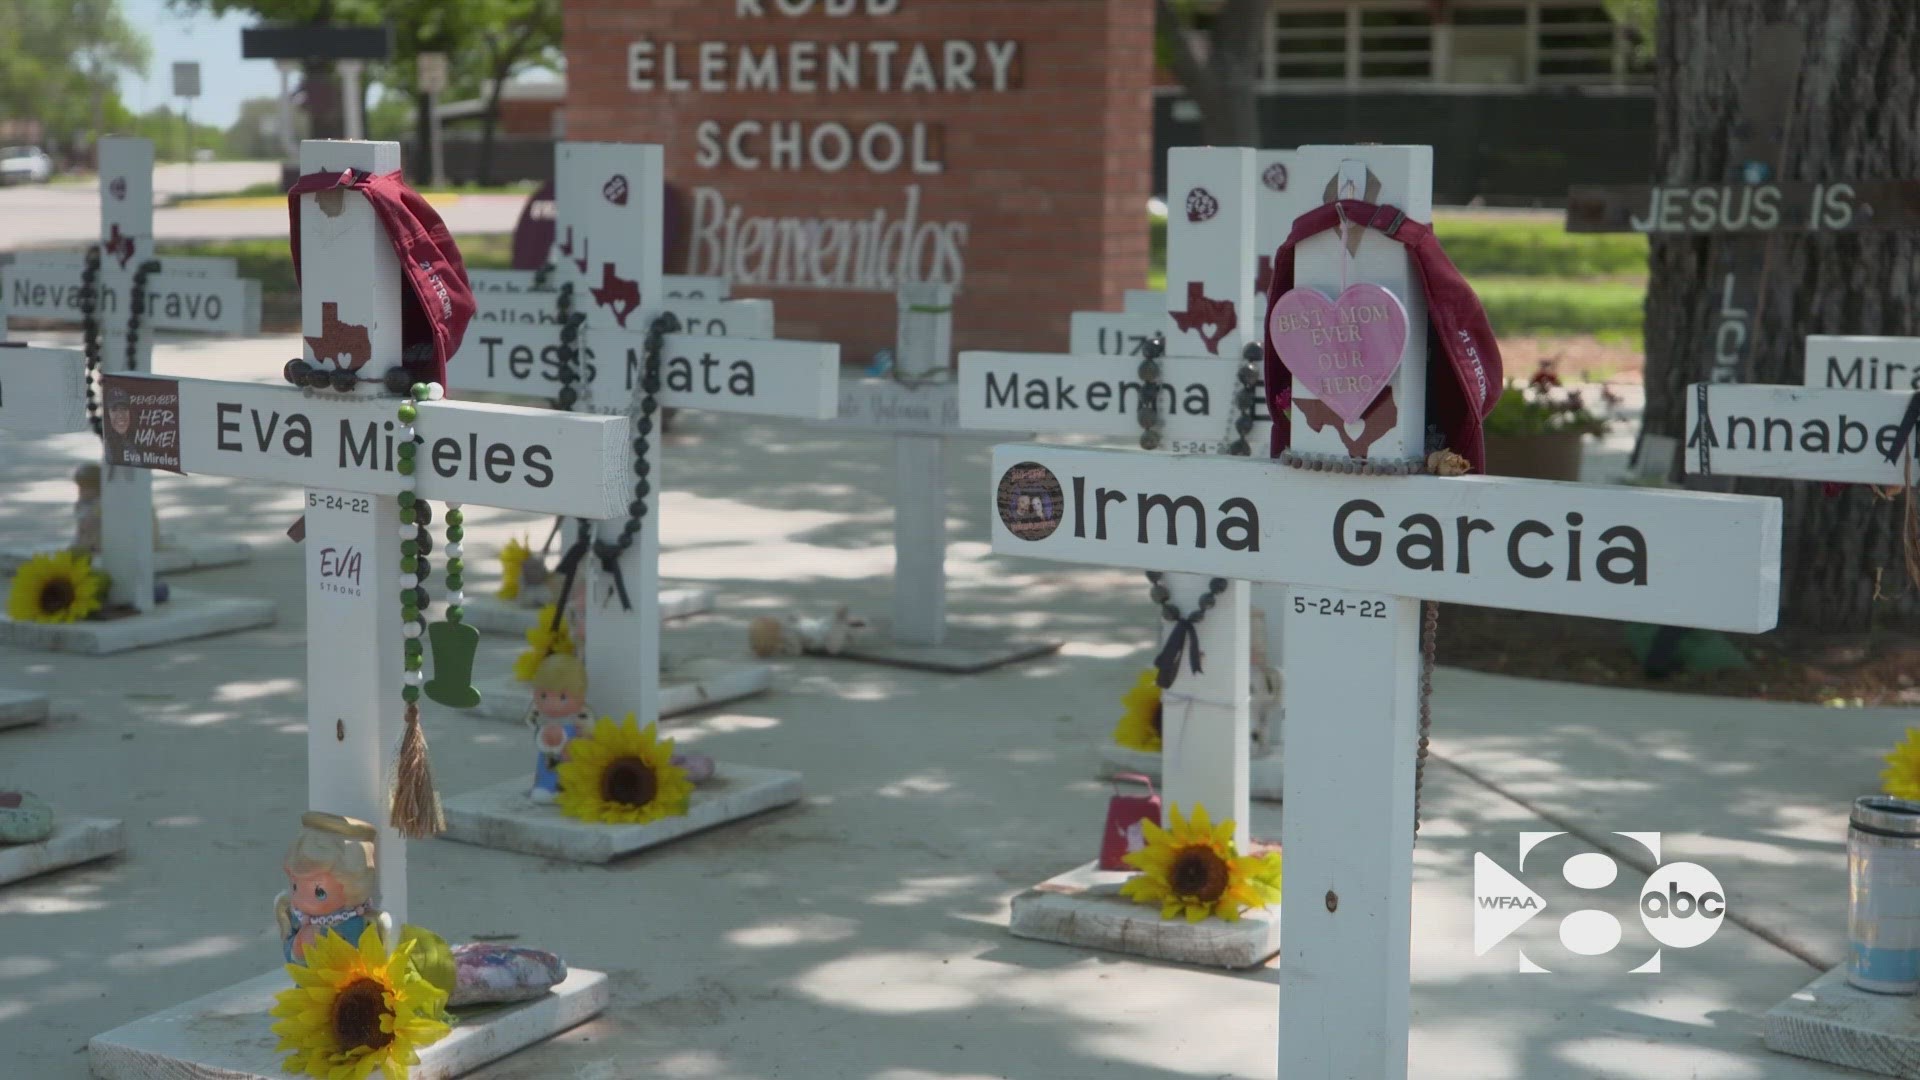 Memorial sites look different than they did a year ago. Plans for a new elementary school are moving along, but the pain from May 24, 2022, hasn't gone away.